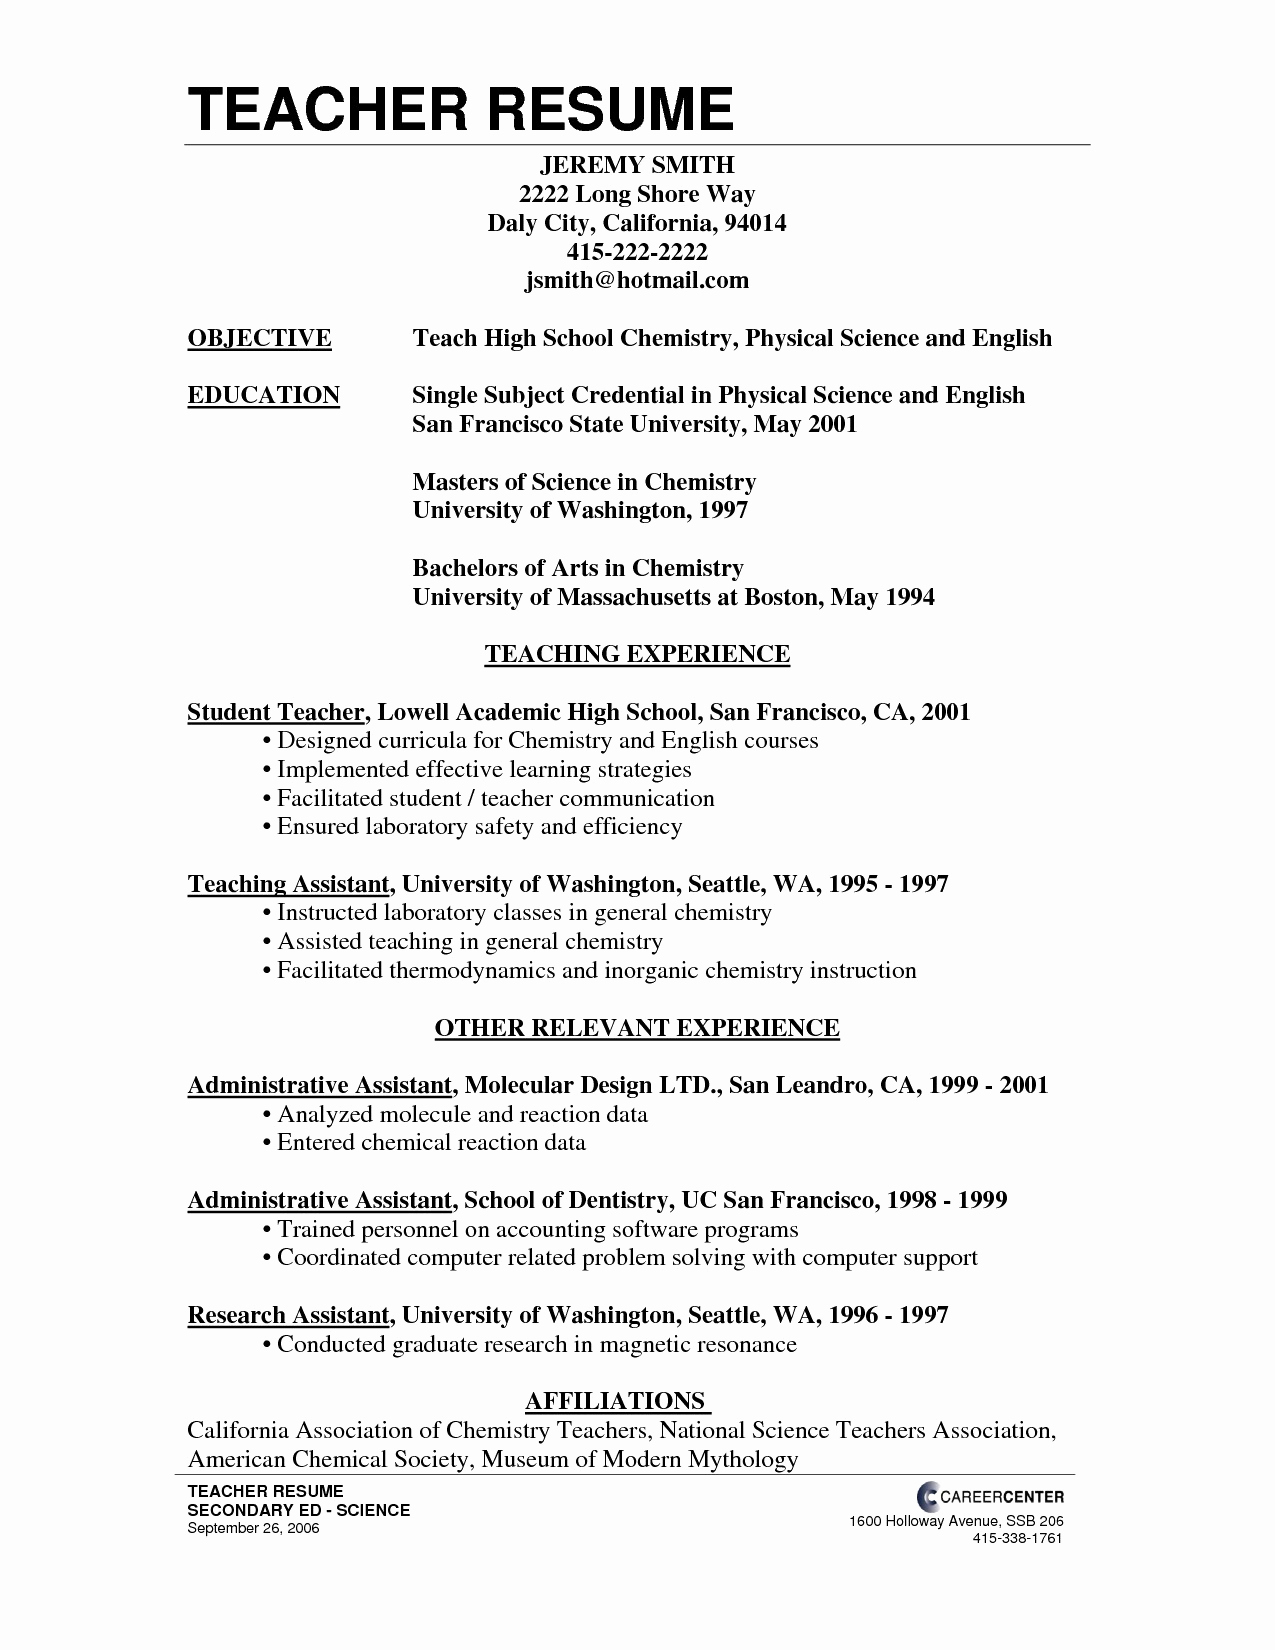 Security Cover Letter Template - Security Guard Resume Best Free Cover Letter Templates Examples